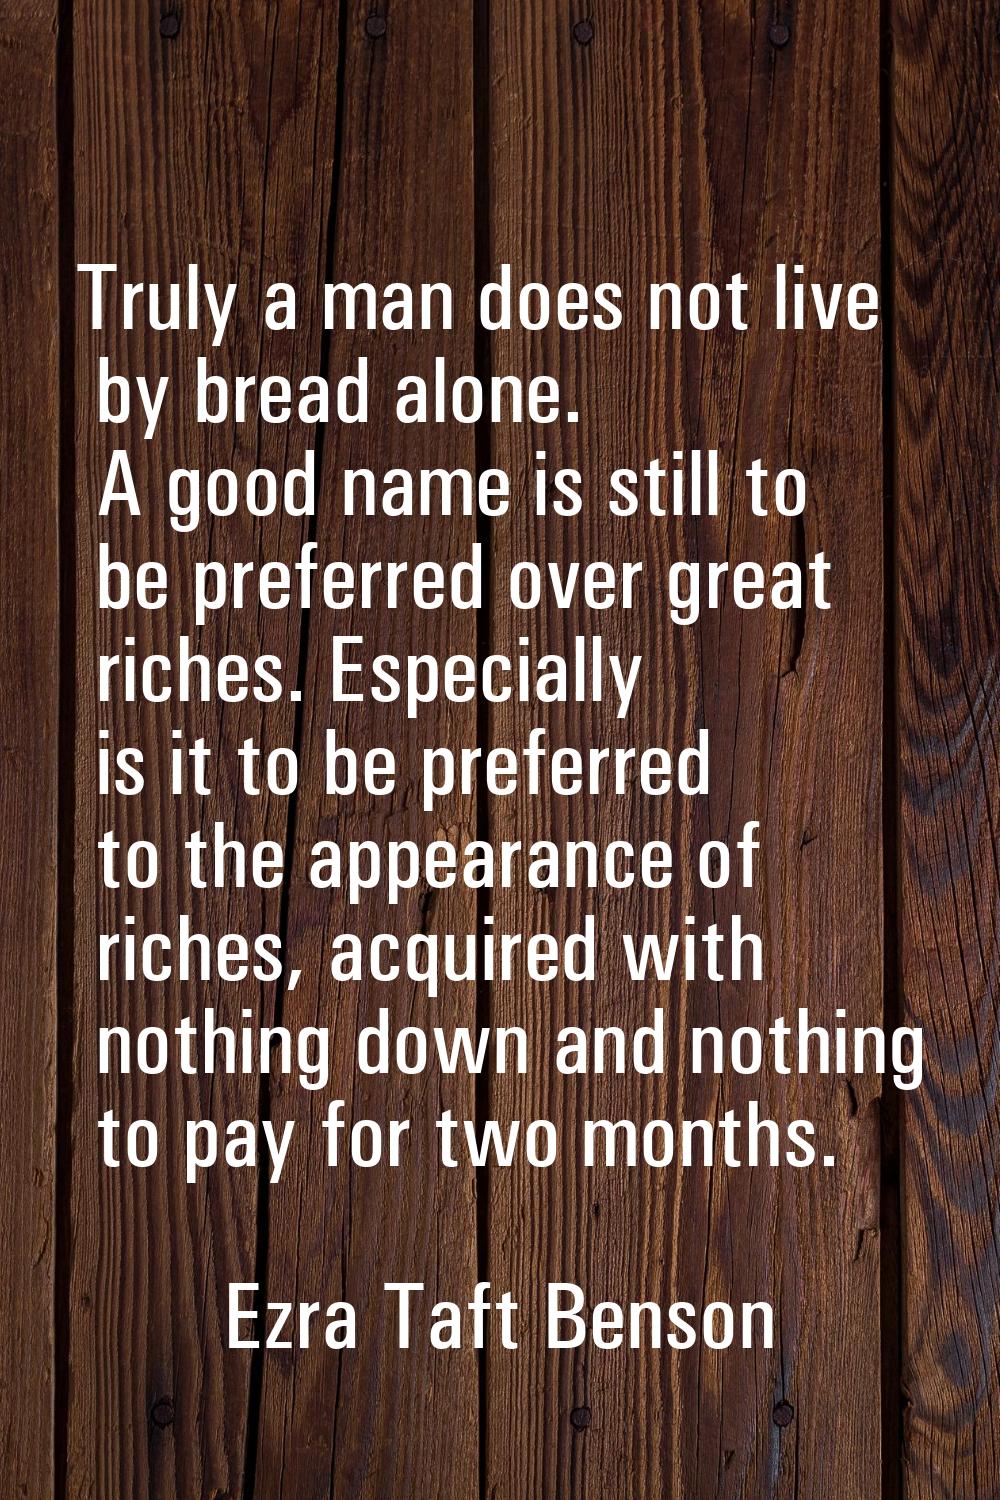 Truly a man does not live by bread alone. A good name is still to be preferred over great riches. E